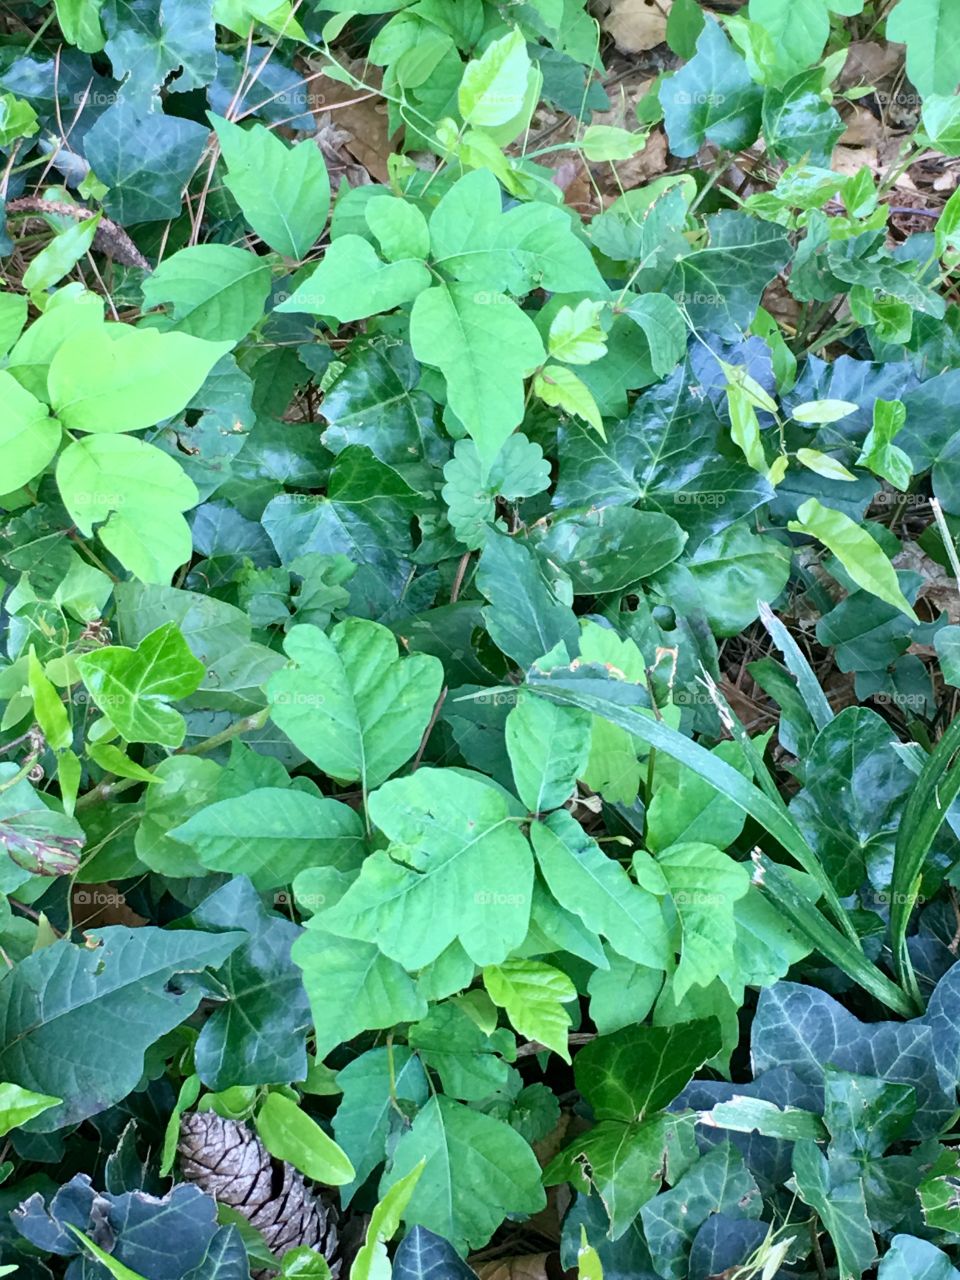 Poison Ivy on the ground.